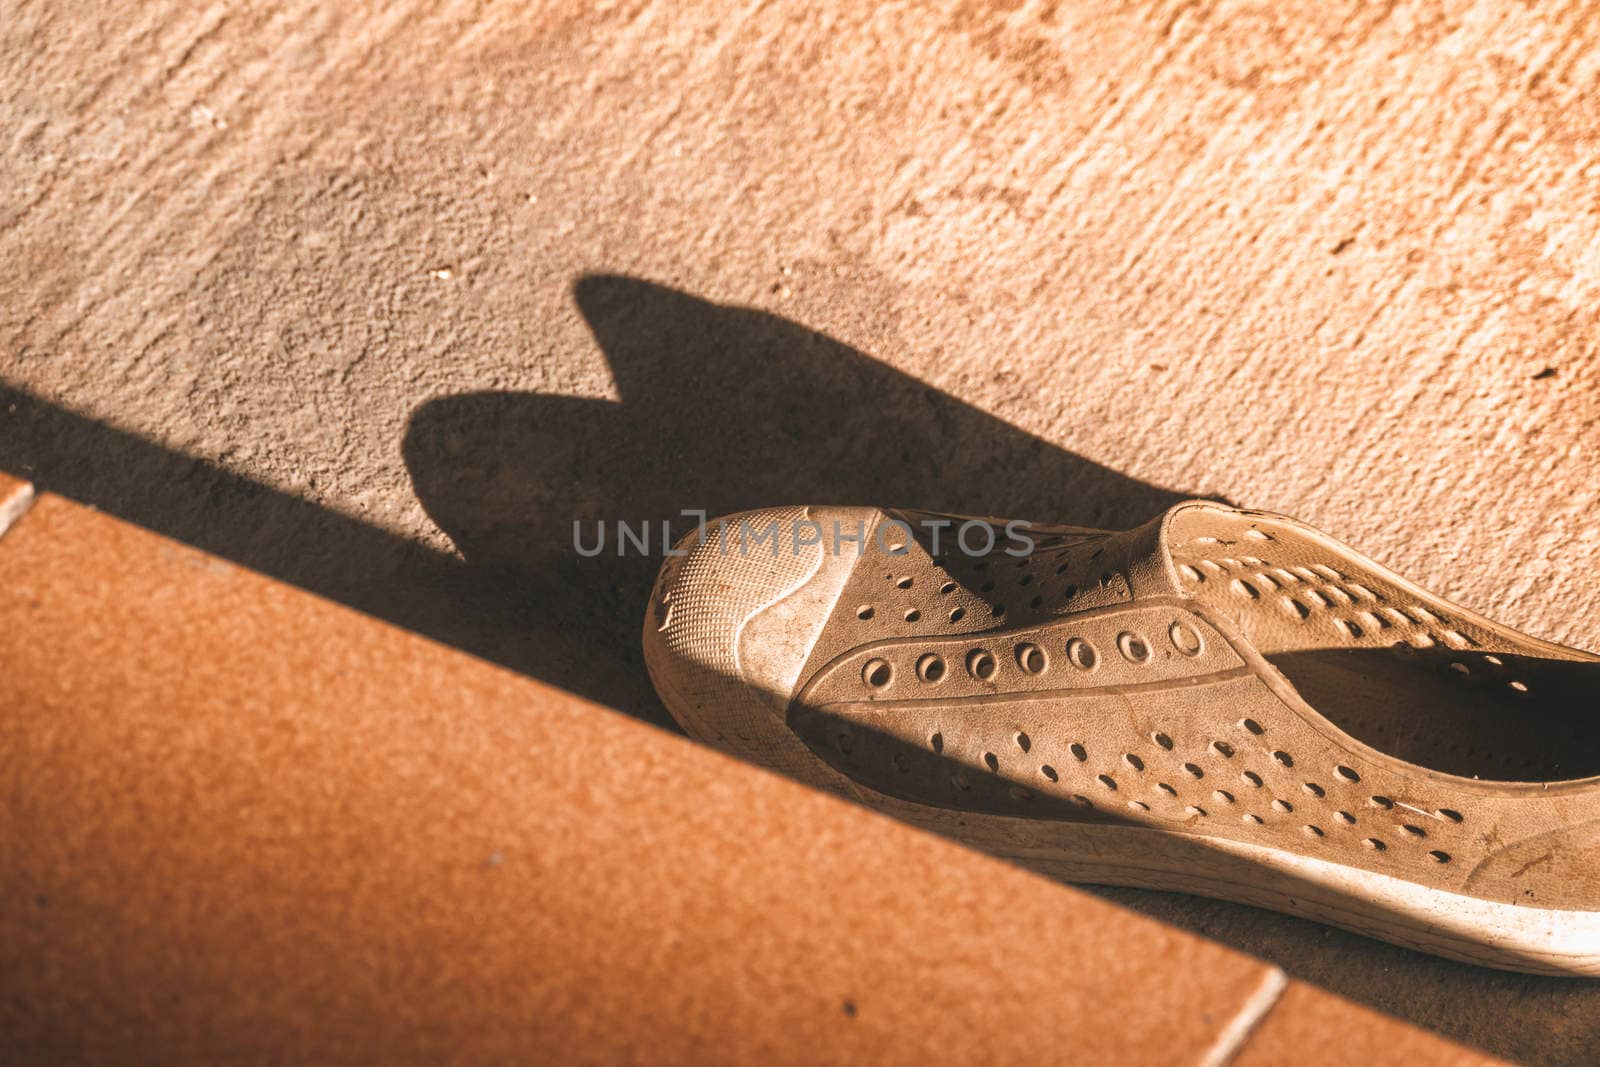 Plastic shoes on tile background with copy space by teerawit